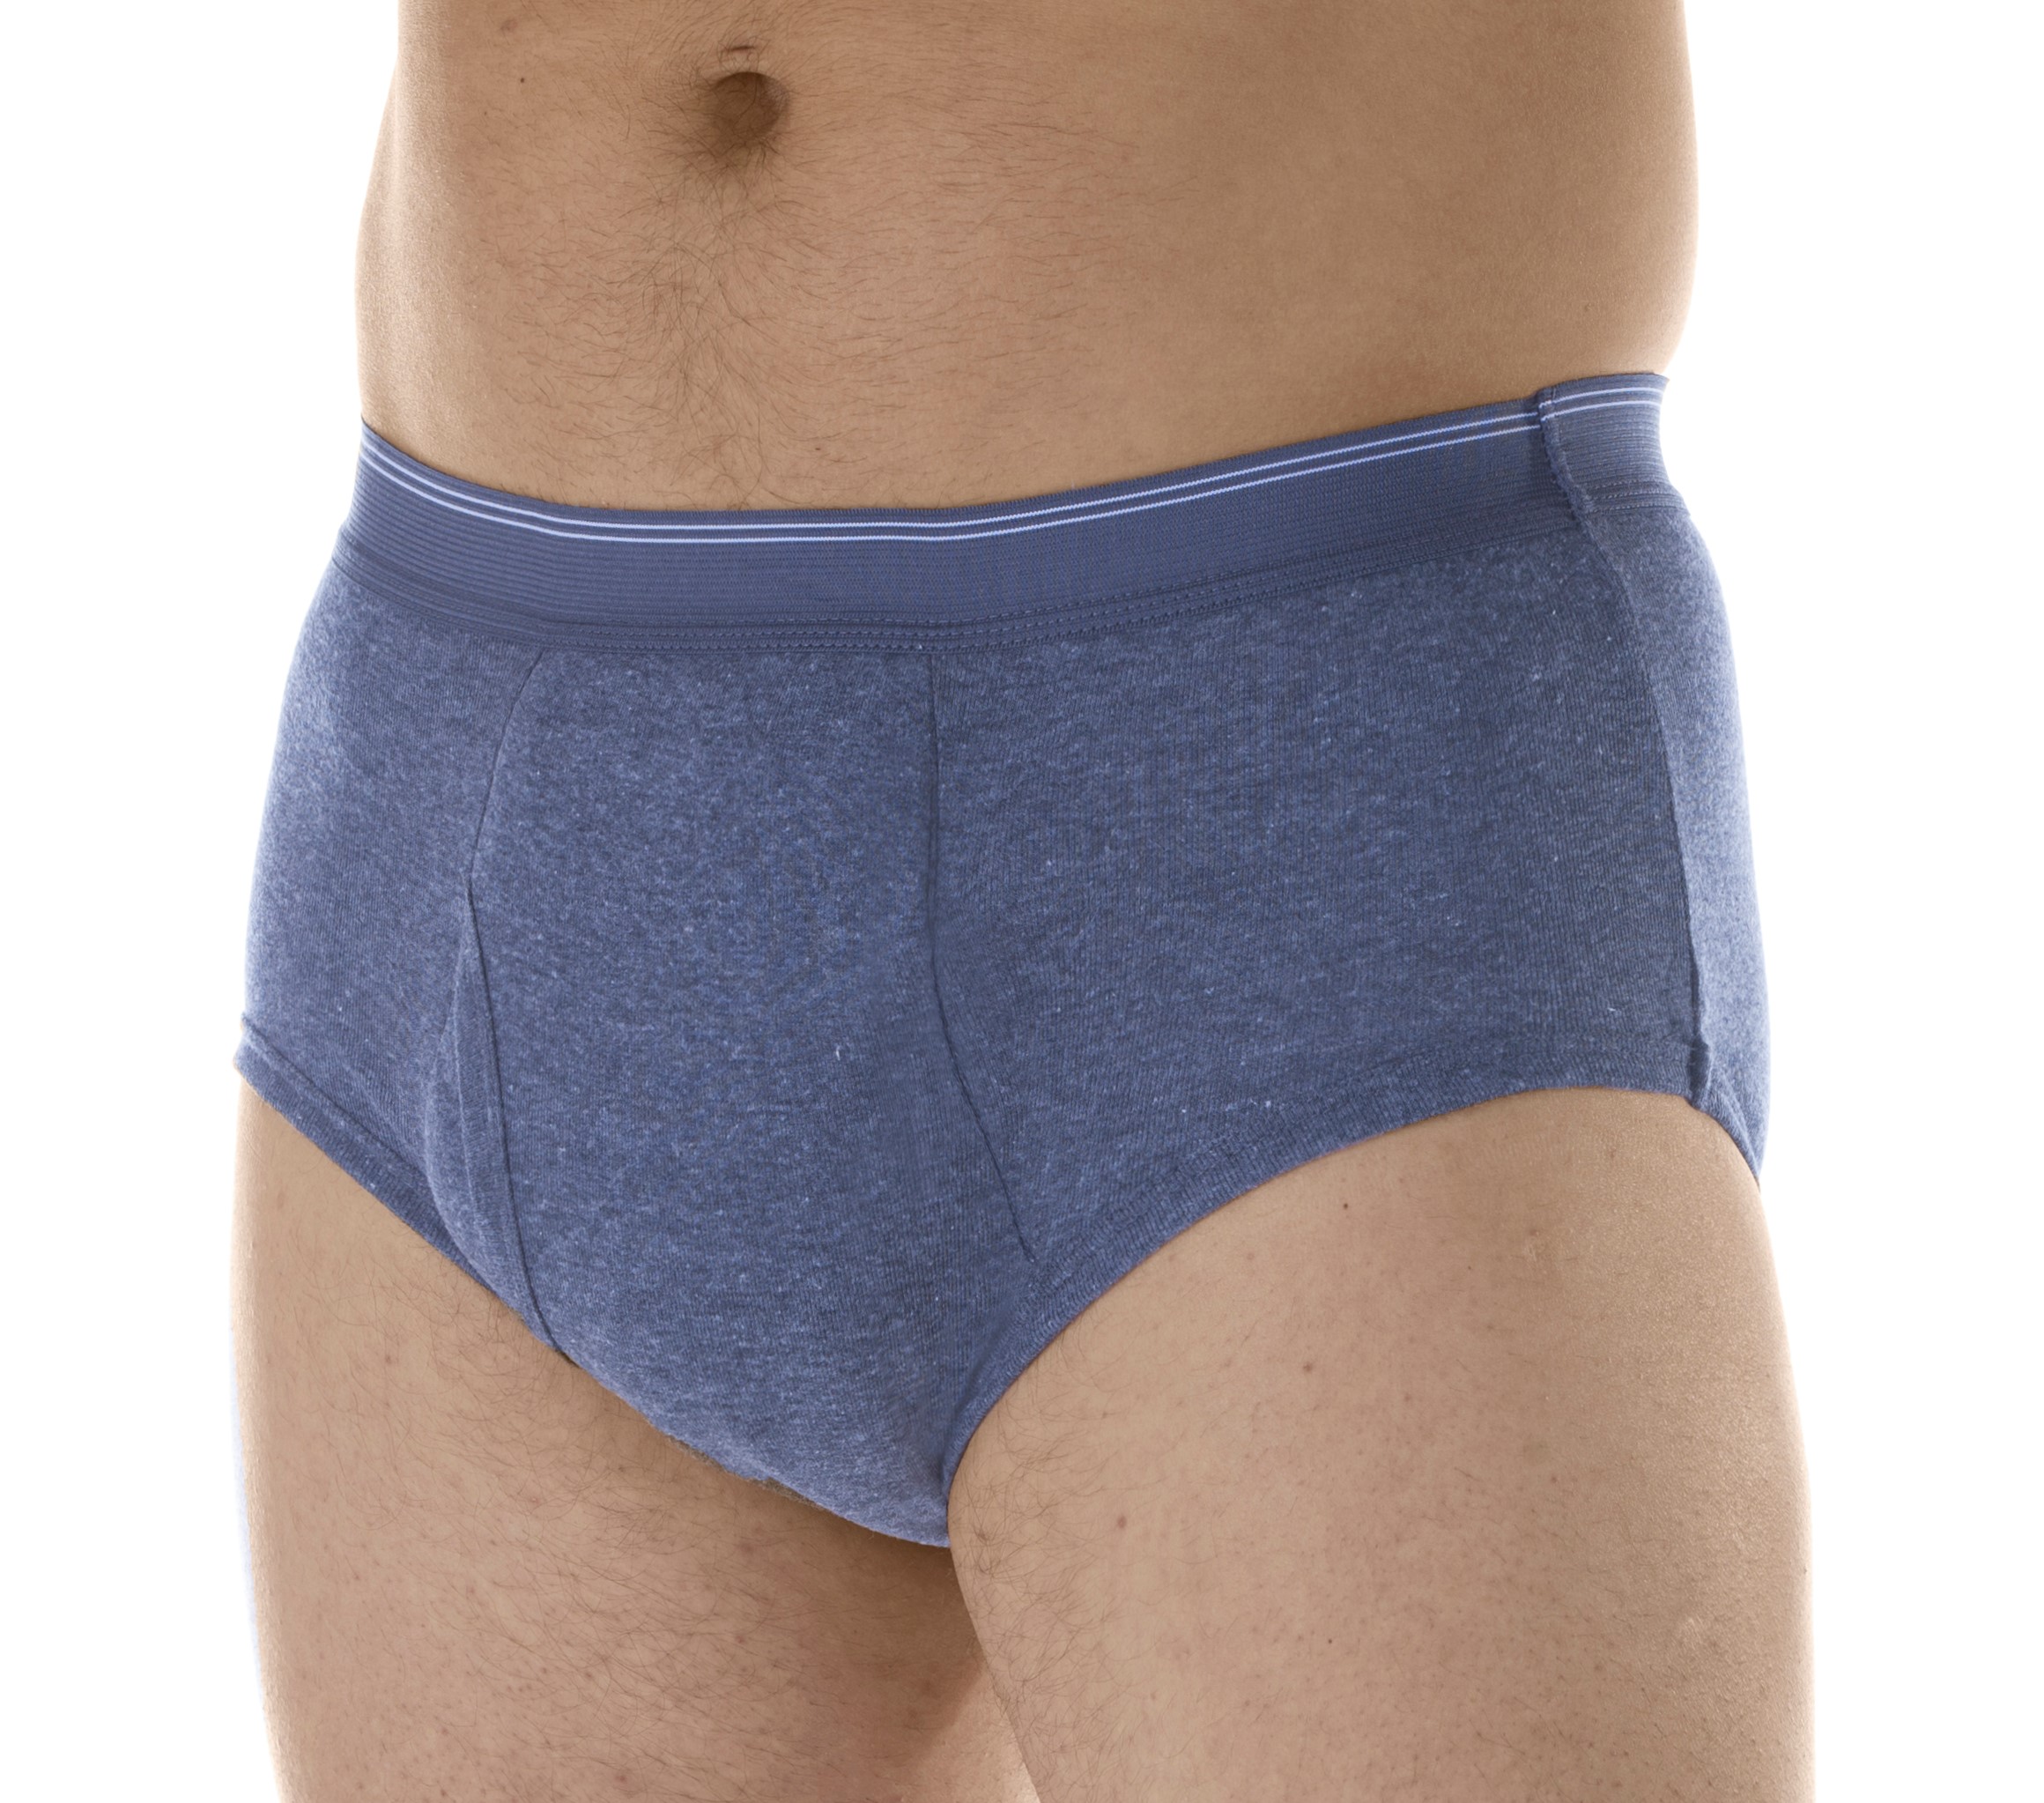 Is Incontinence Underwear Right For You?, Wearever